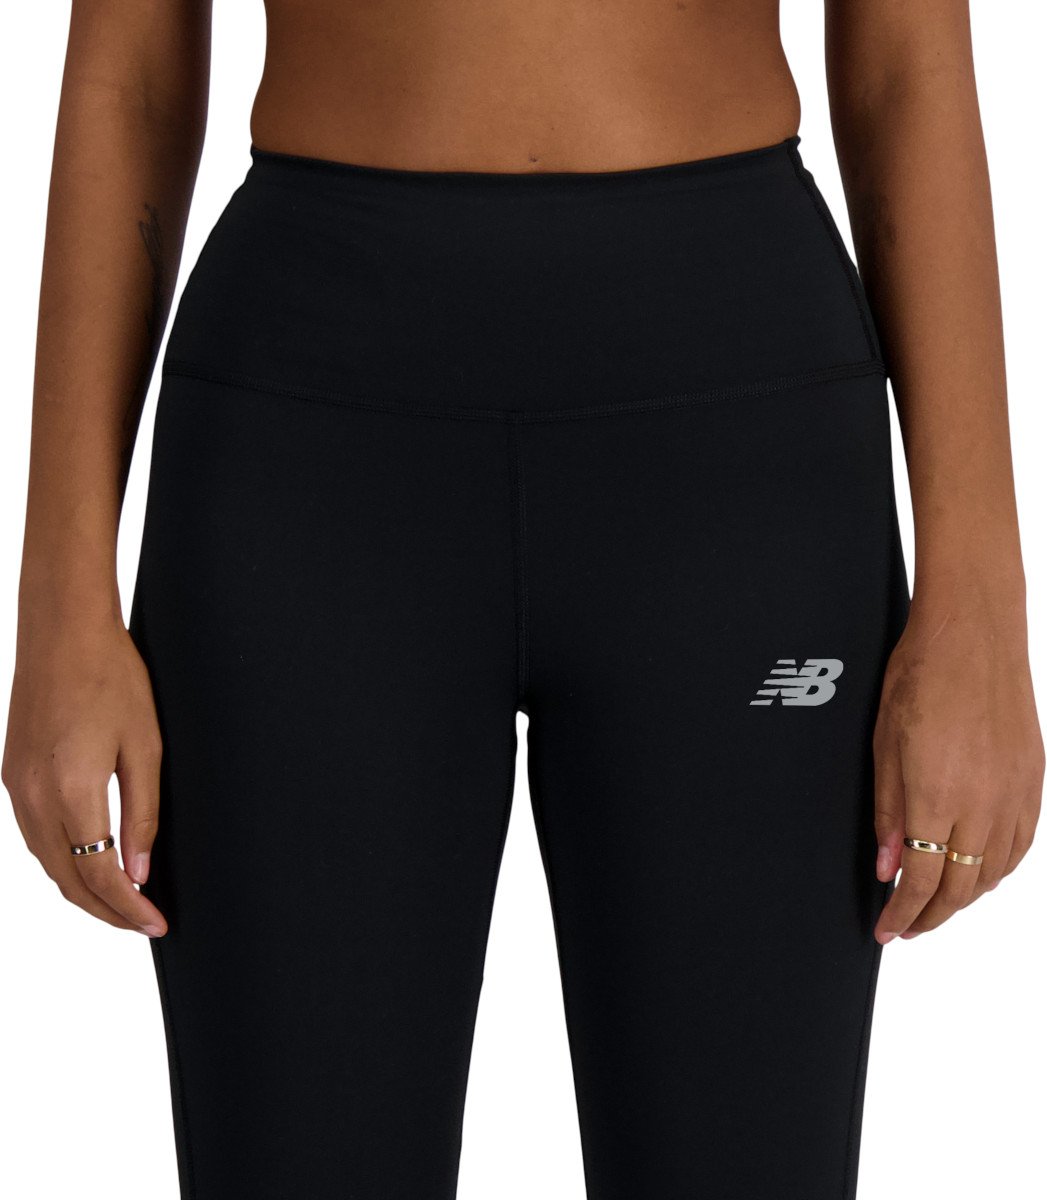 Buy New Balance Accelerate Leggings (MP23234) black from £25.77 (Today) –  Best Deals on